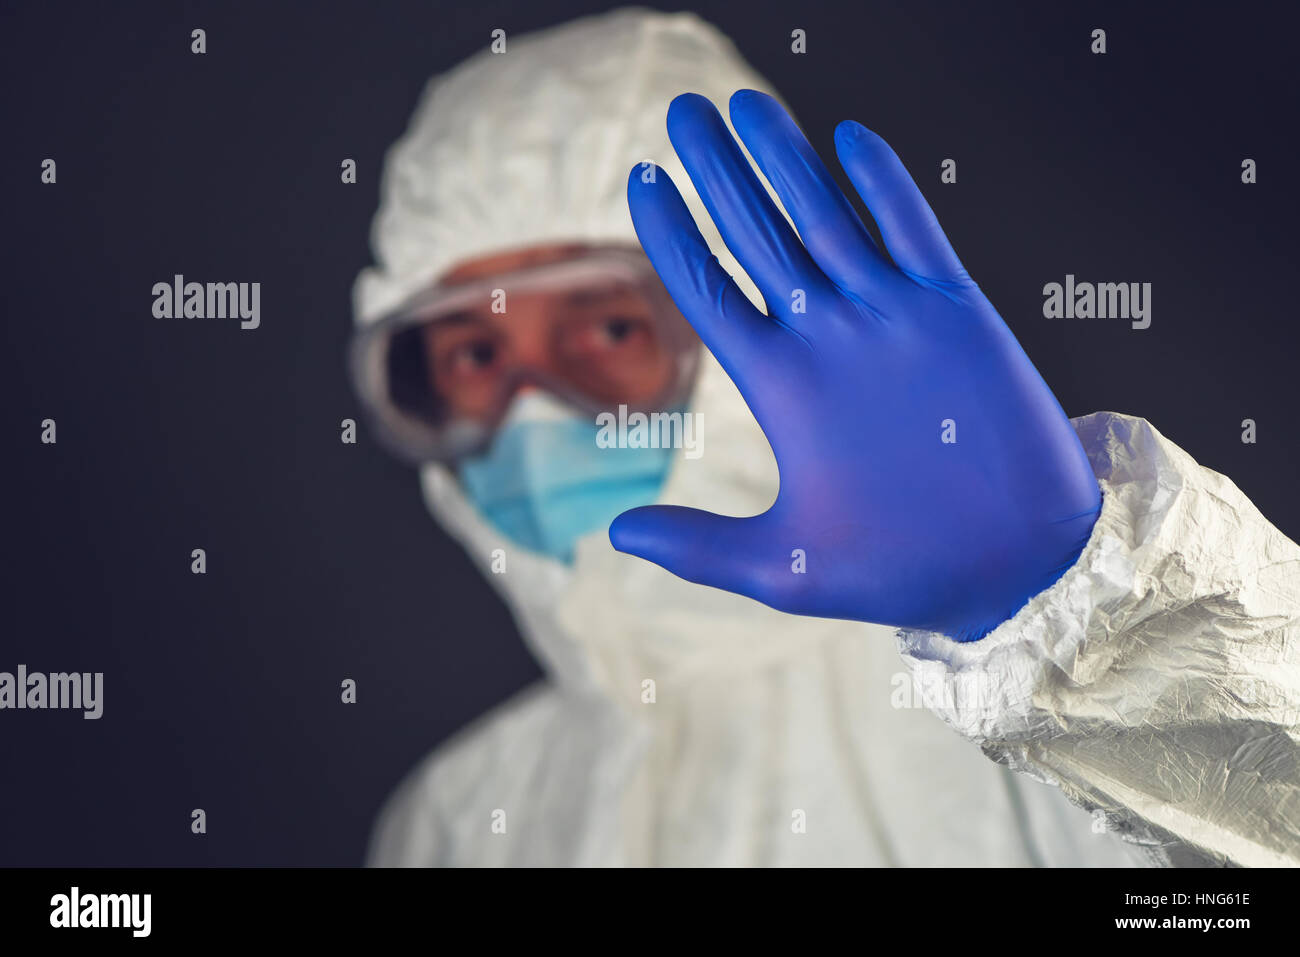 Medical scientist wearing protective clothing and glassware gesturing stop sign in quarantine Stock Photo